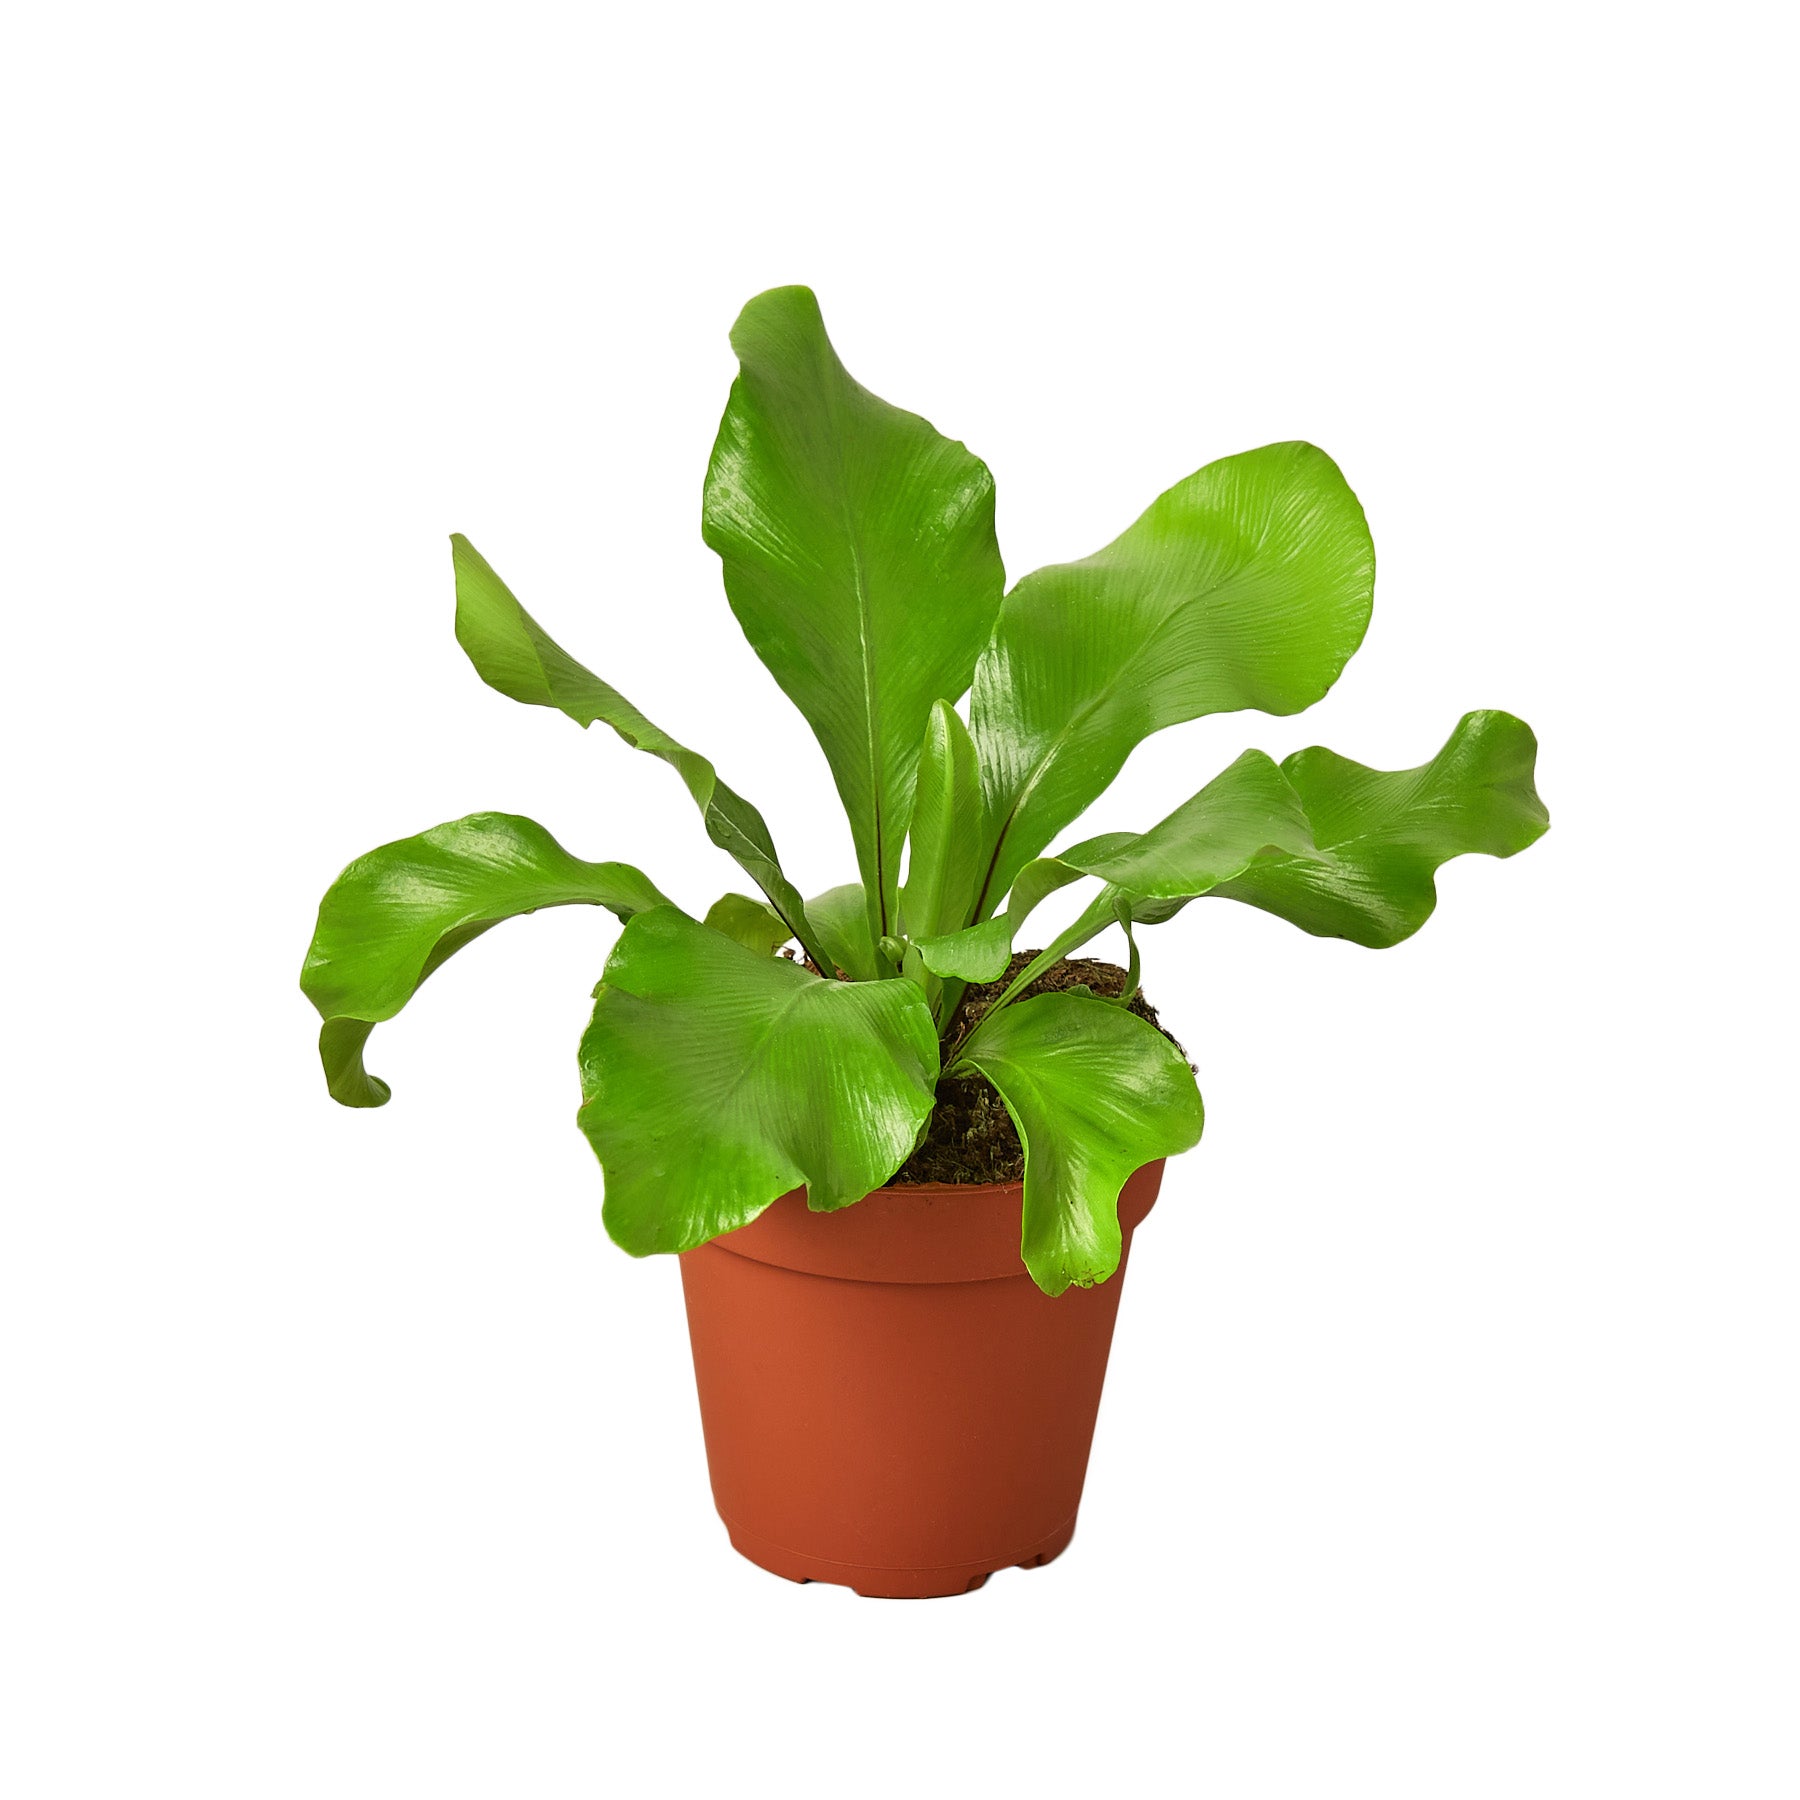 A potted plant on a white background at the best garden center near me.